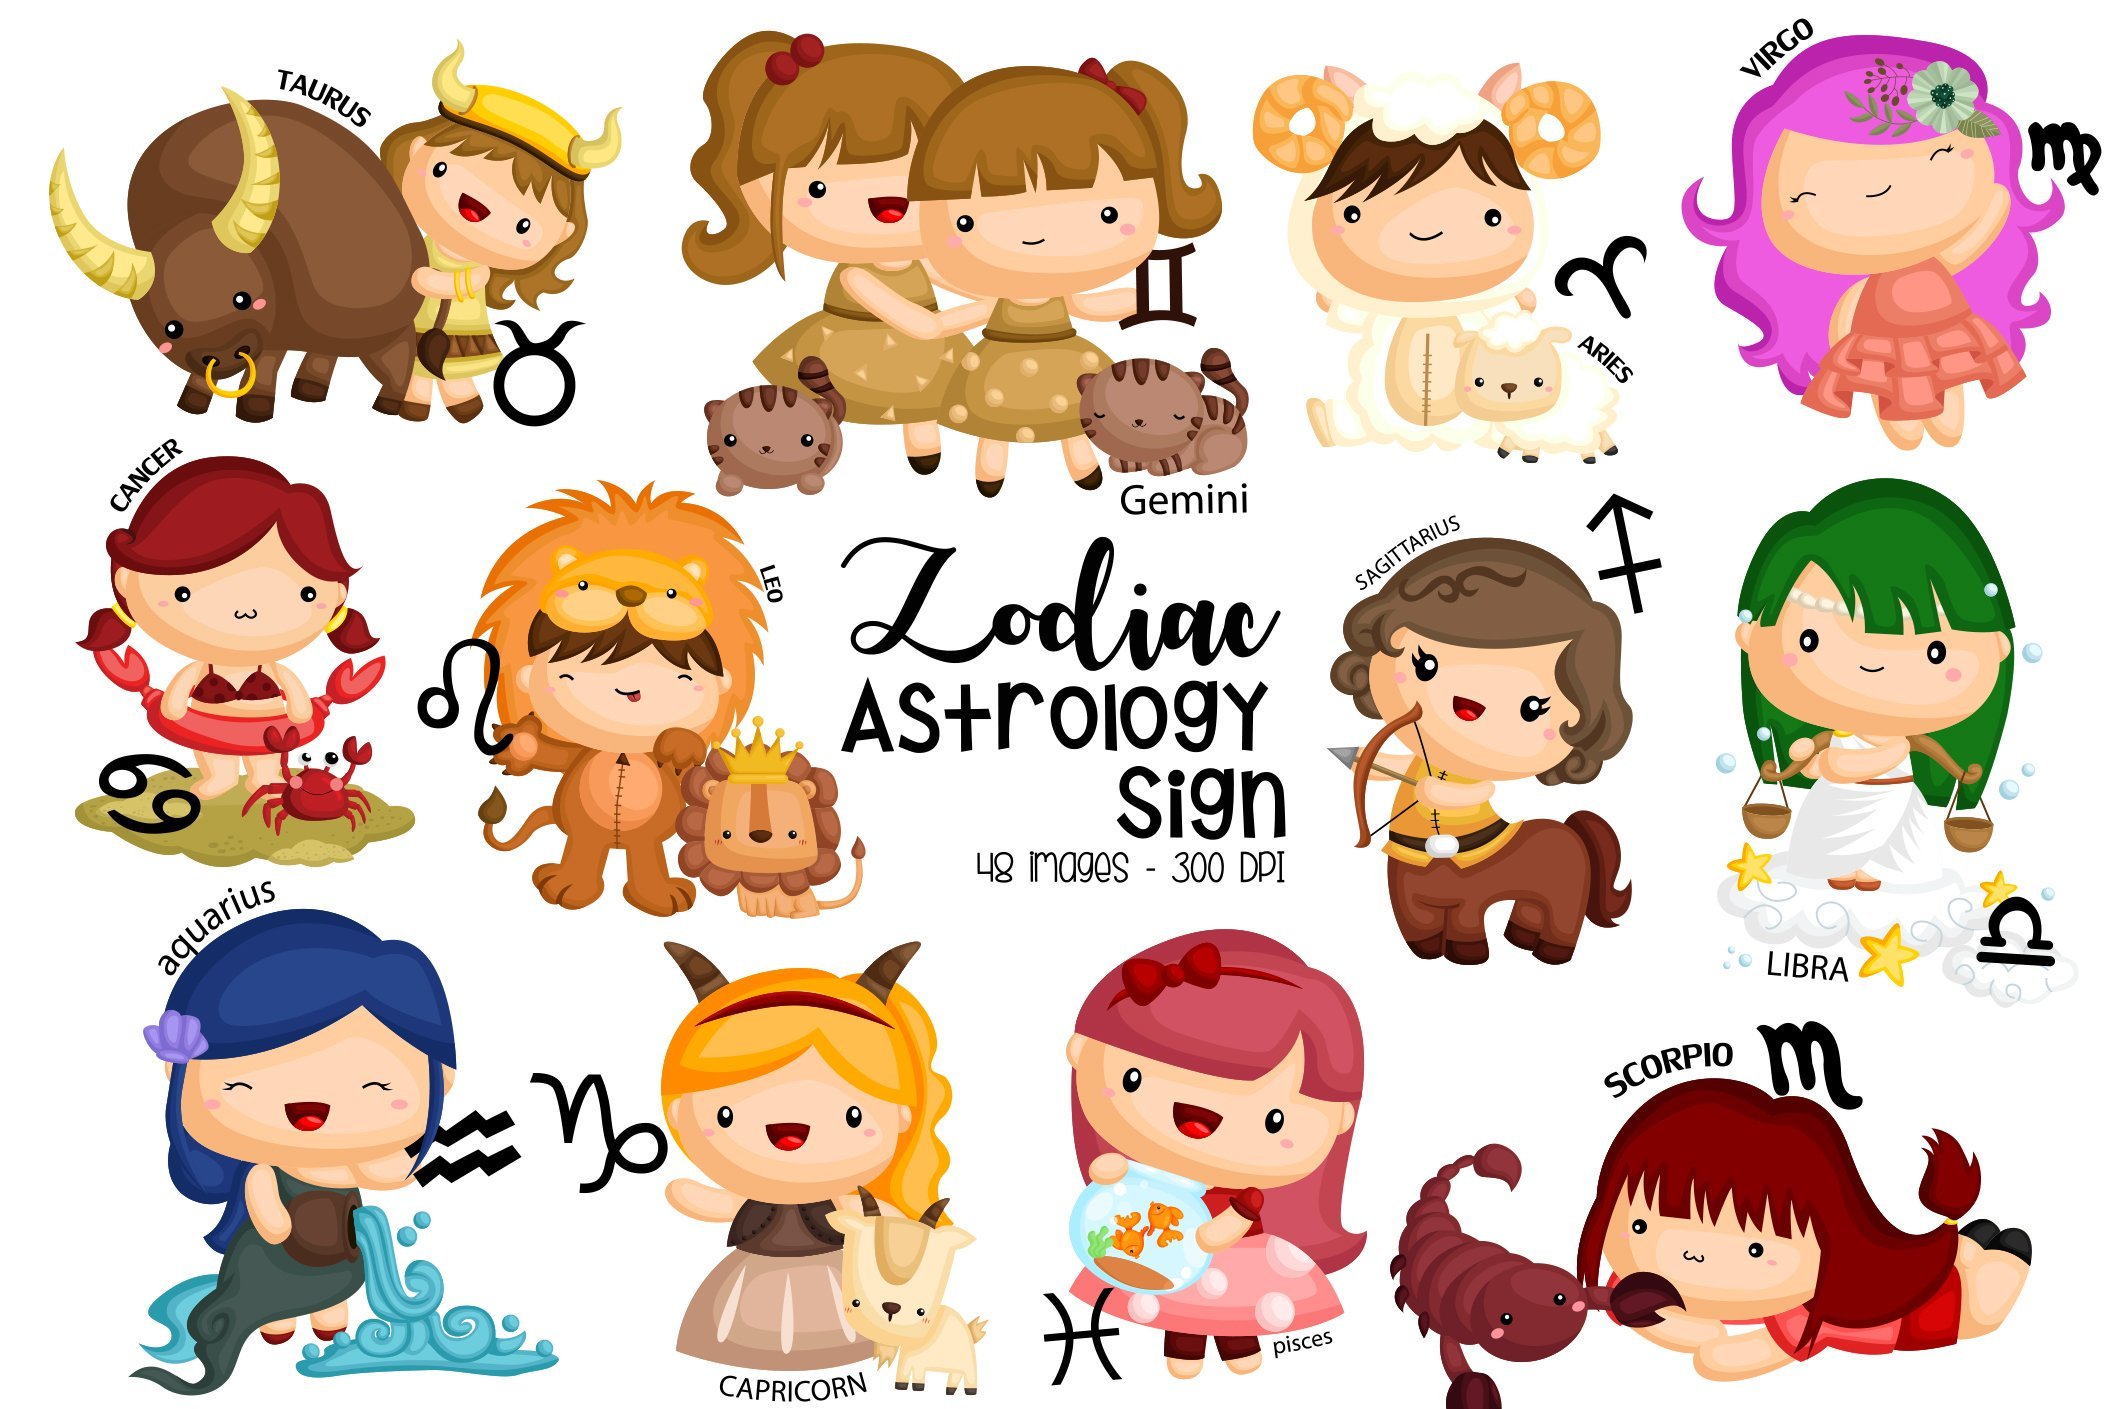 Cool design of the zodiac astrology signs.